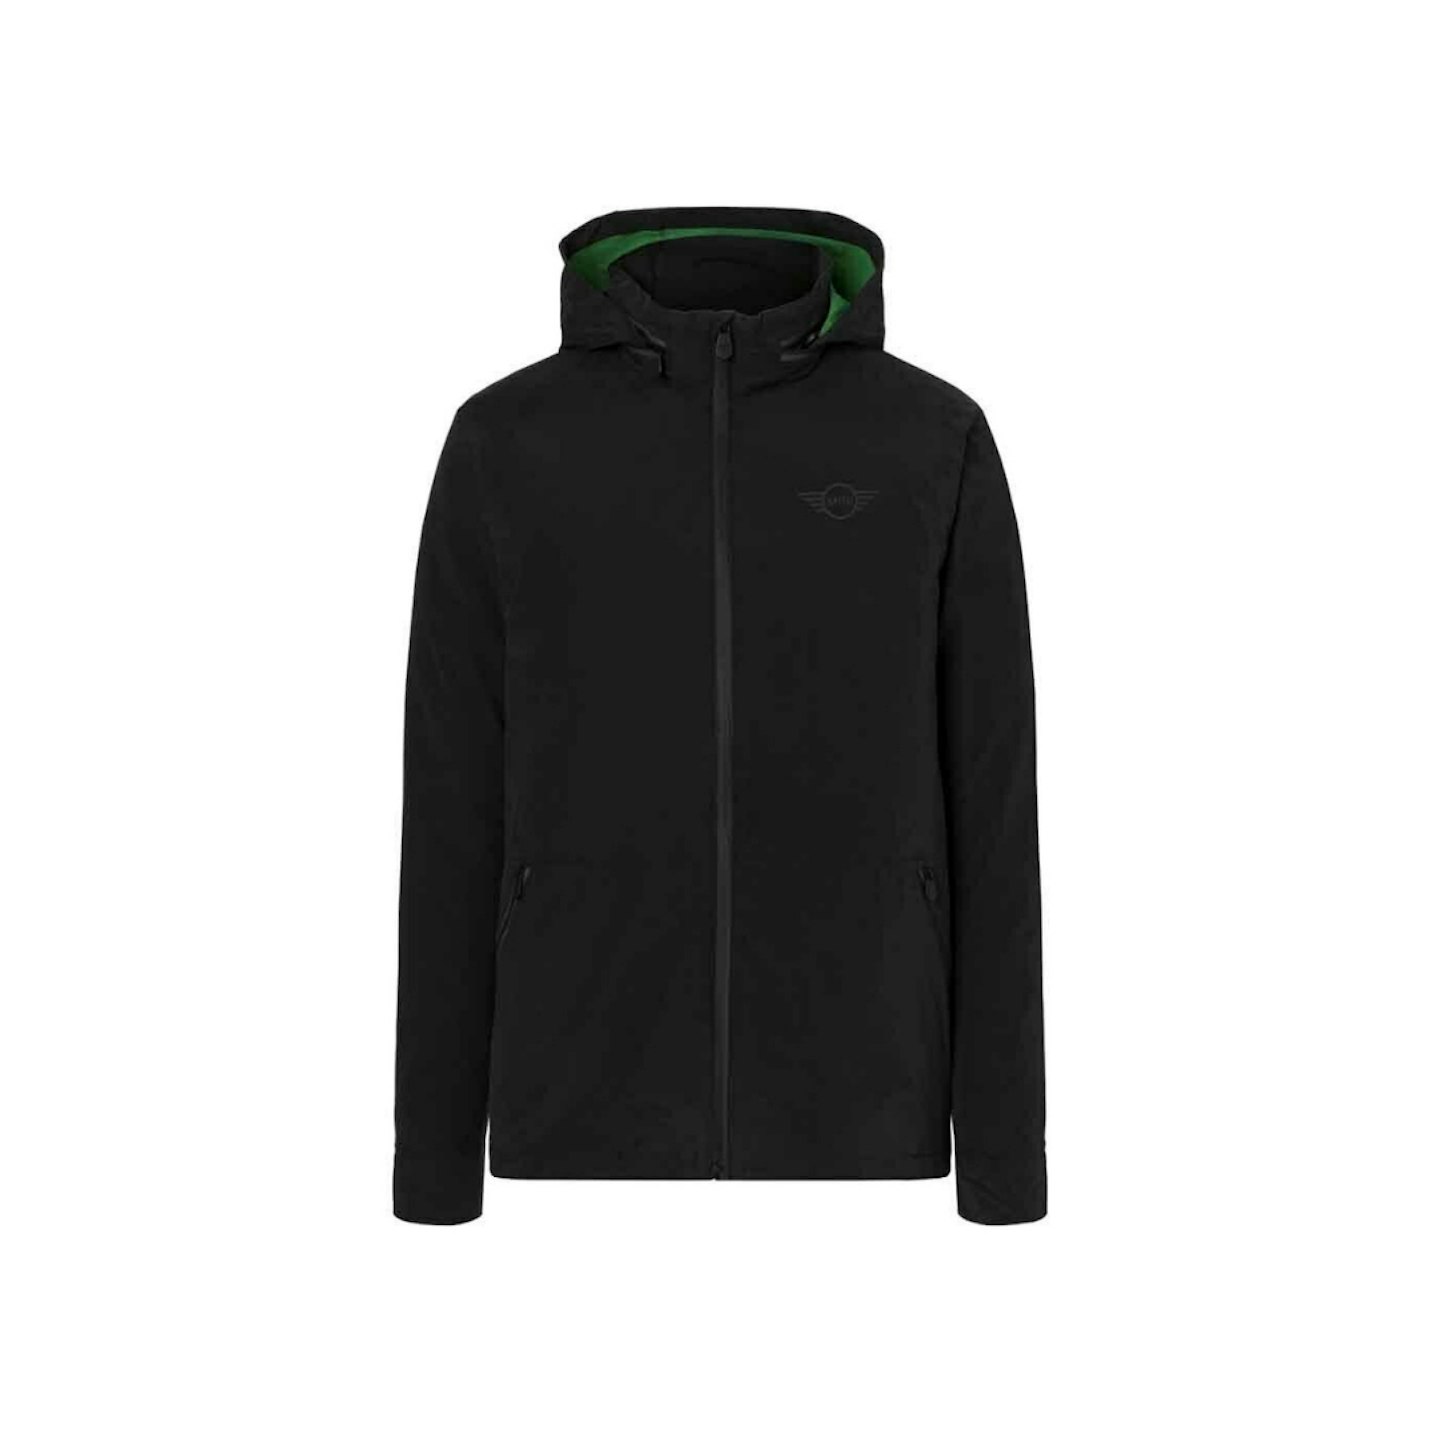 MINI Genuine Mens Jacket Two-Tone Water Repellent Hooded